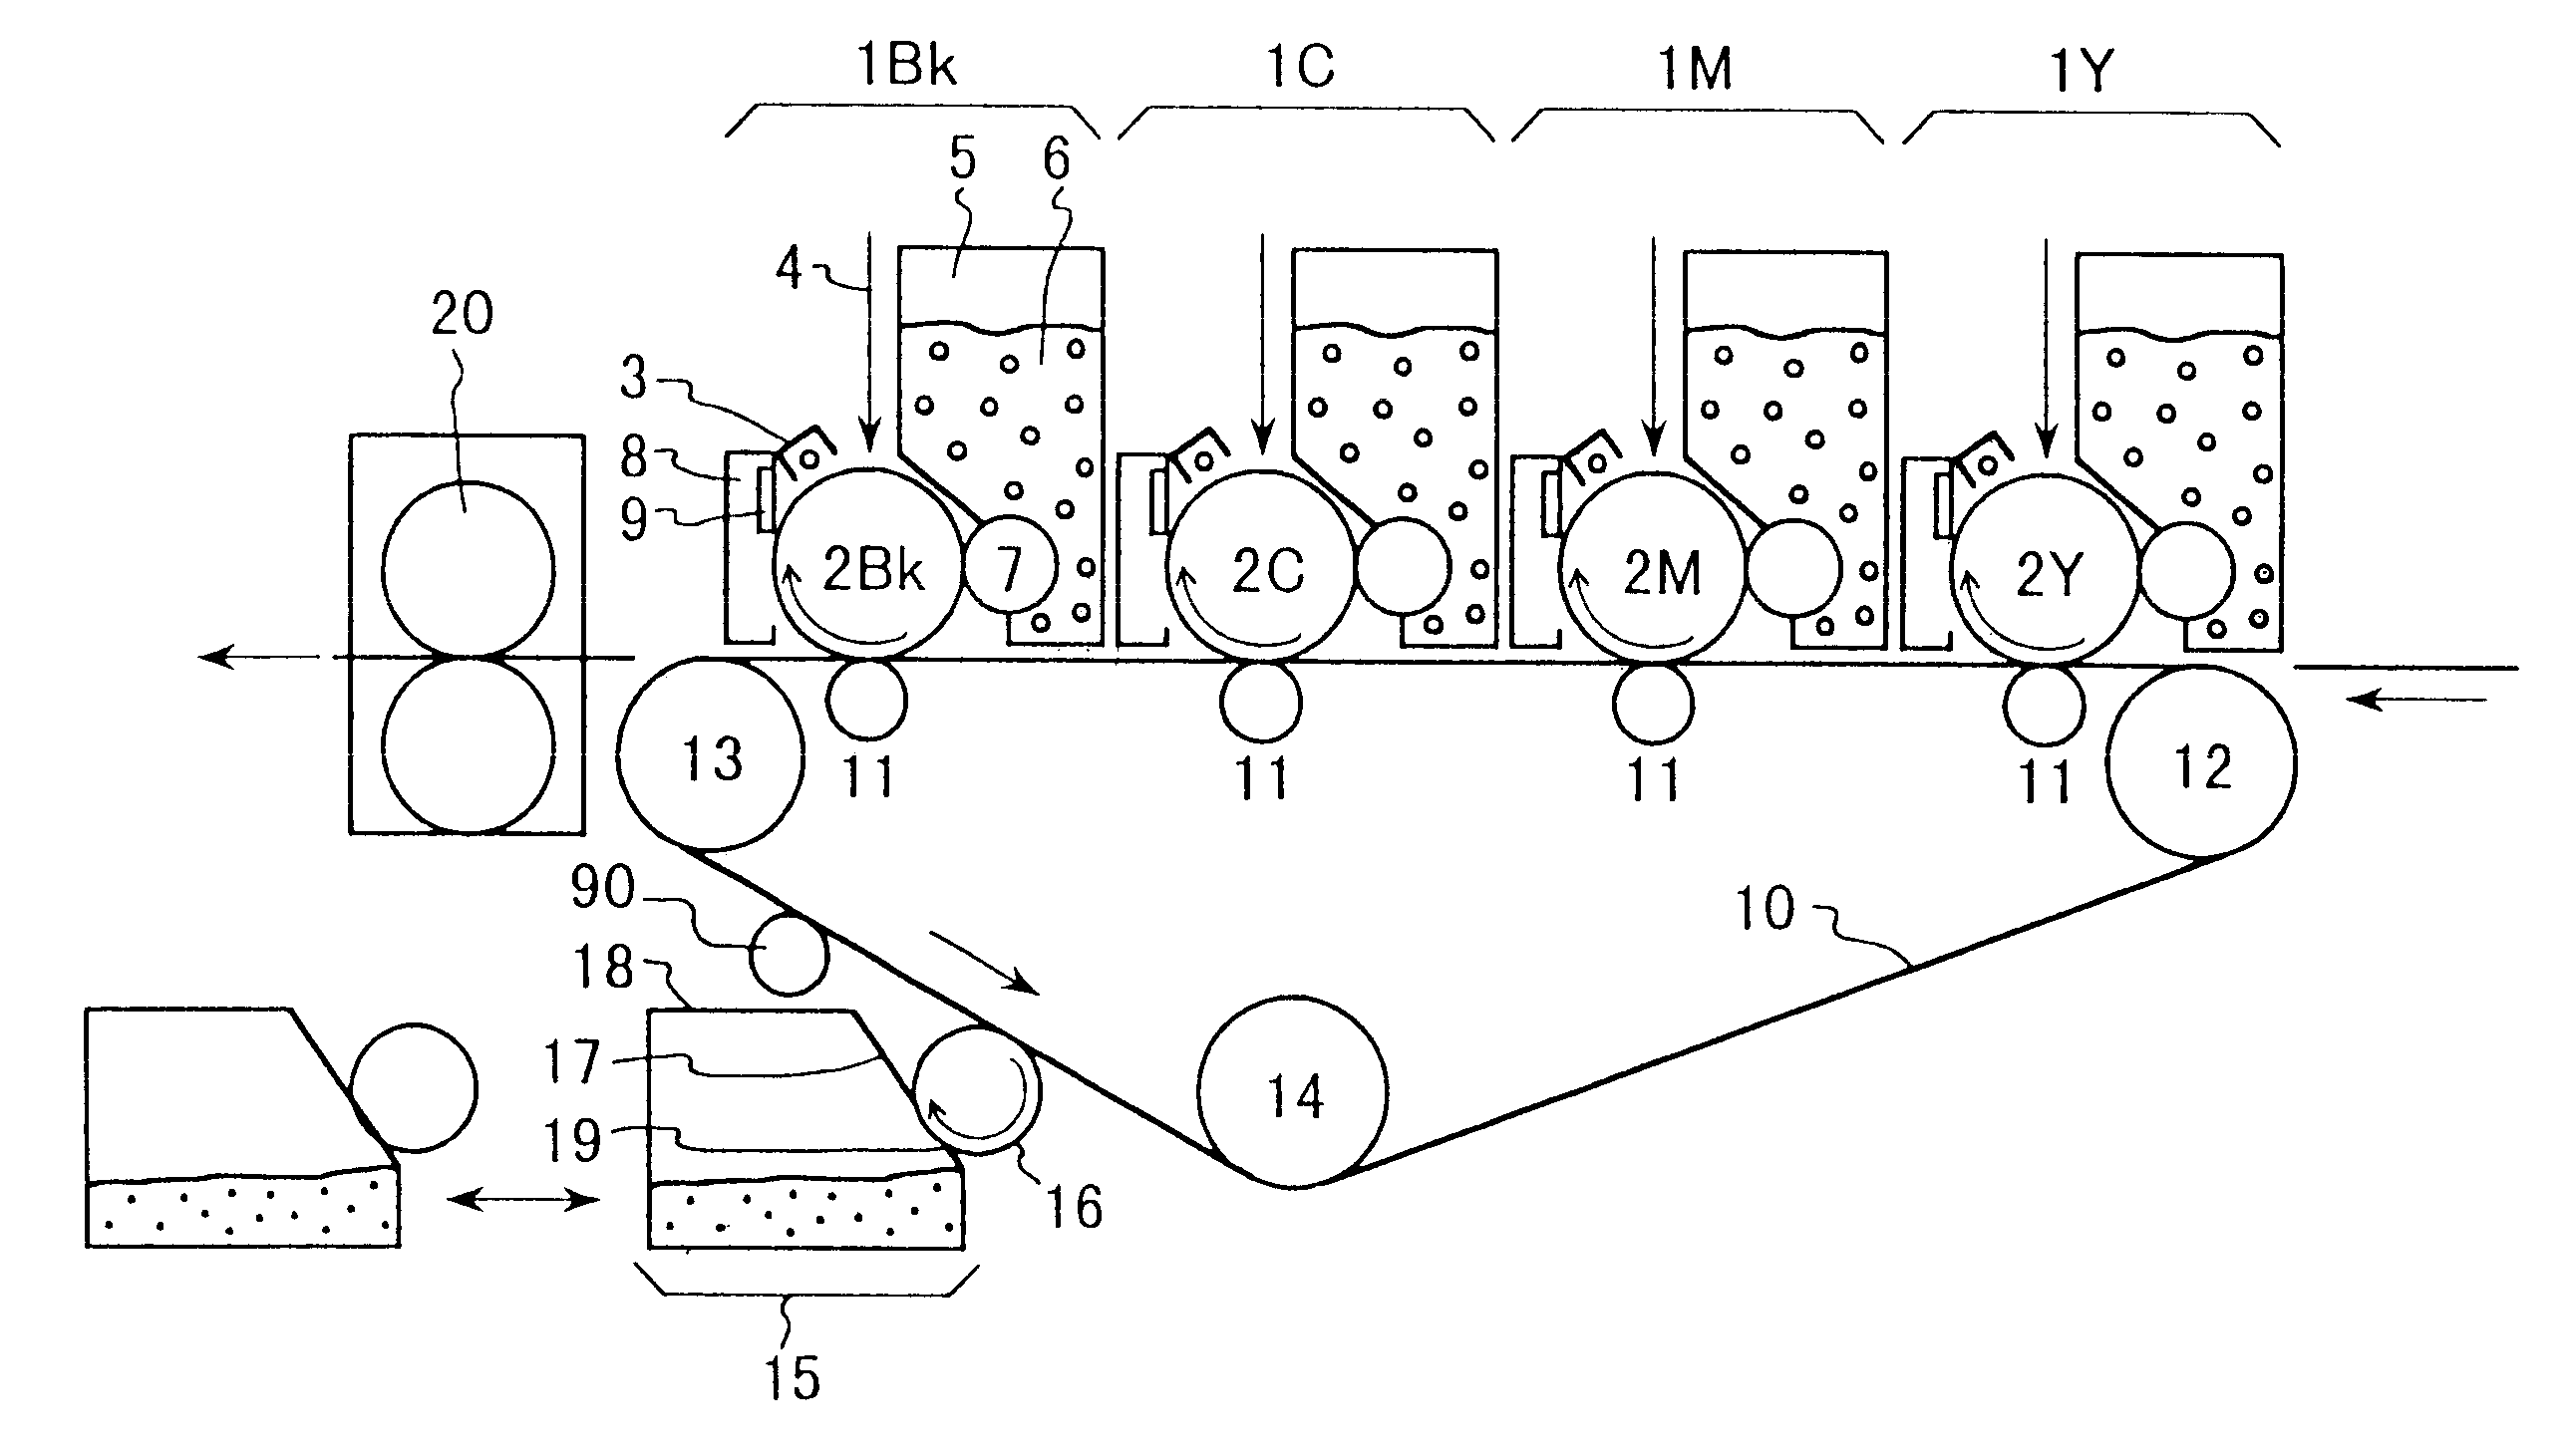 Image forming apparatus, transfer belt unit, cleaning device and cleaner unit used for image forming apparatus